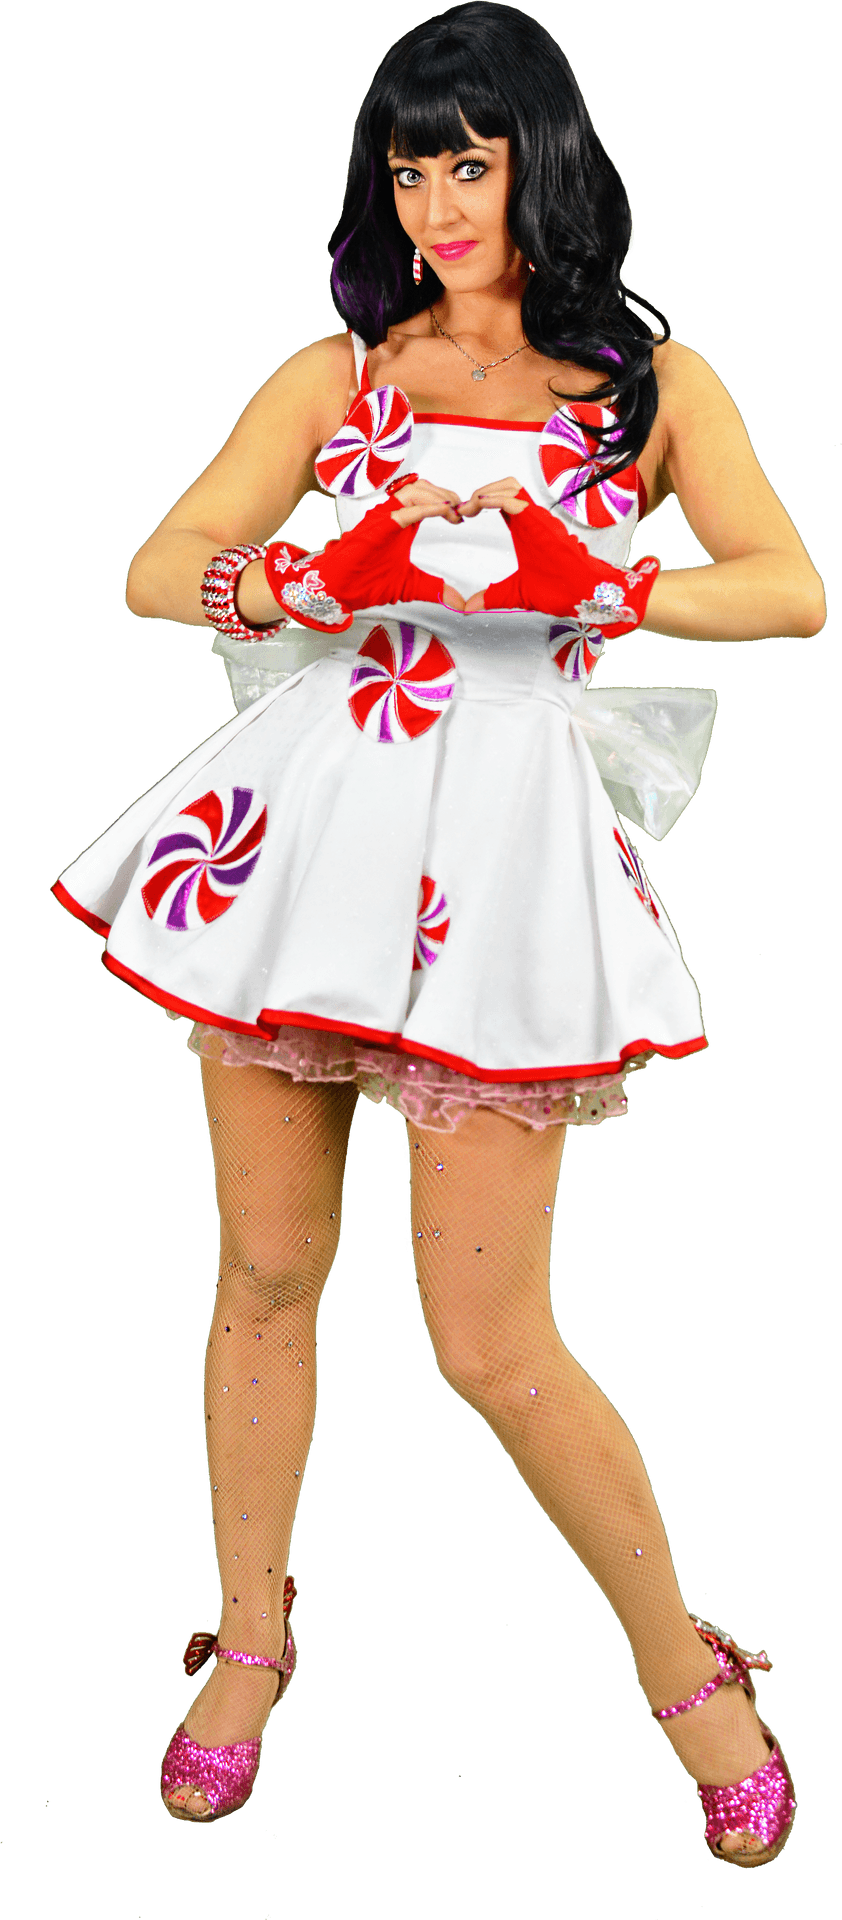 Katy Perry Candy Dress Pose PNG